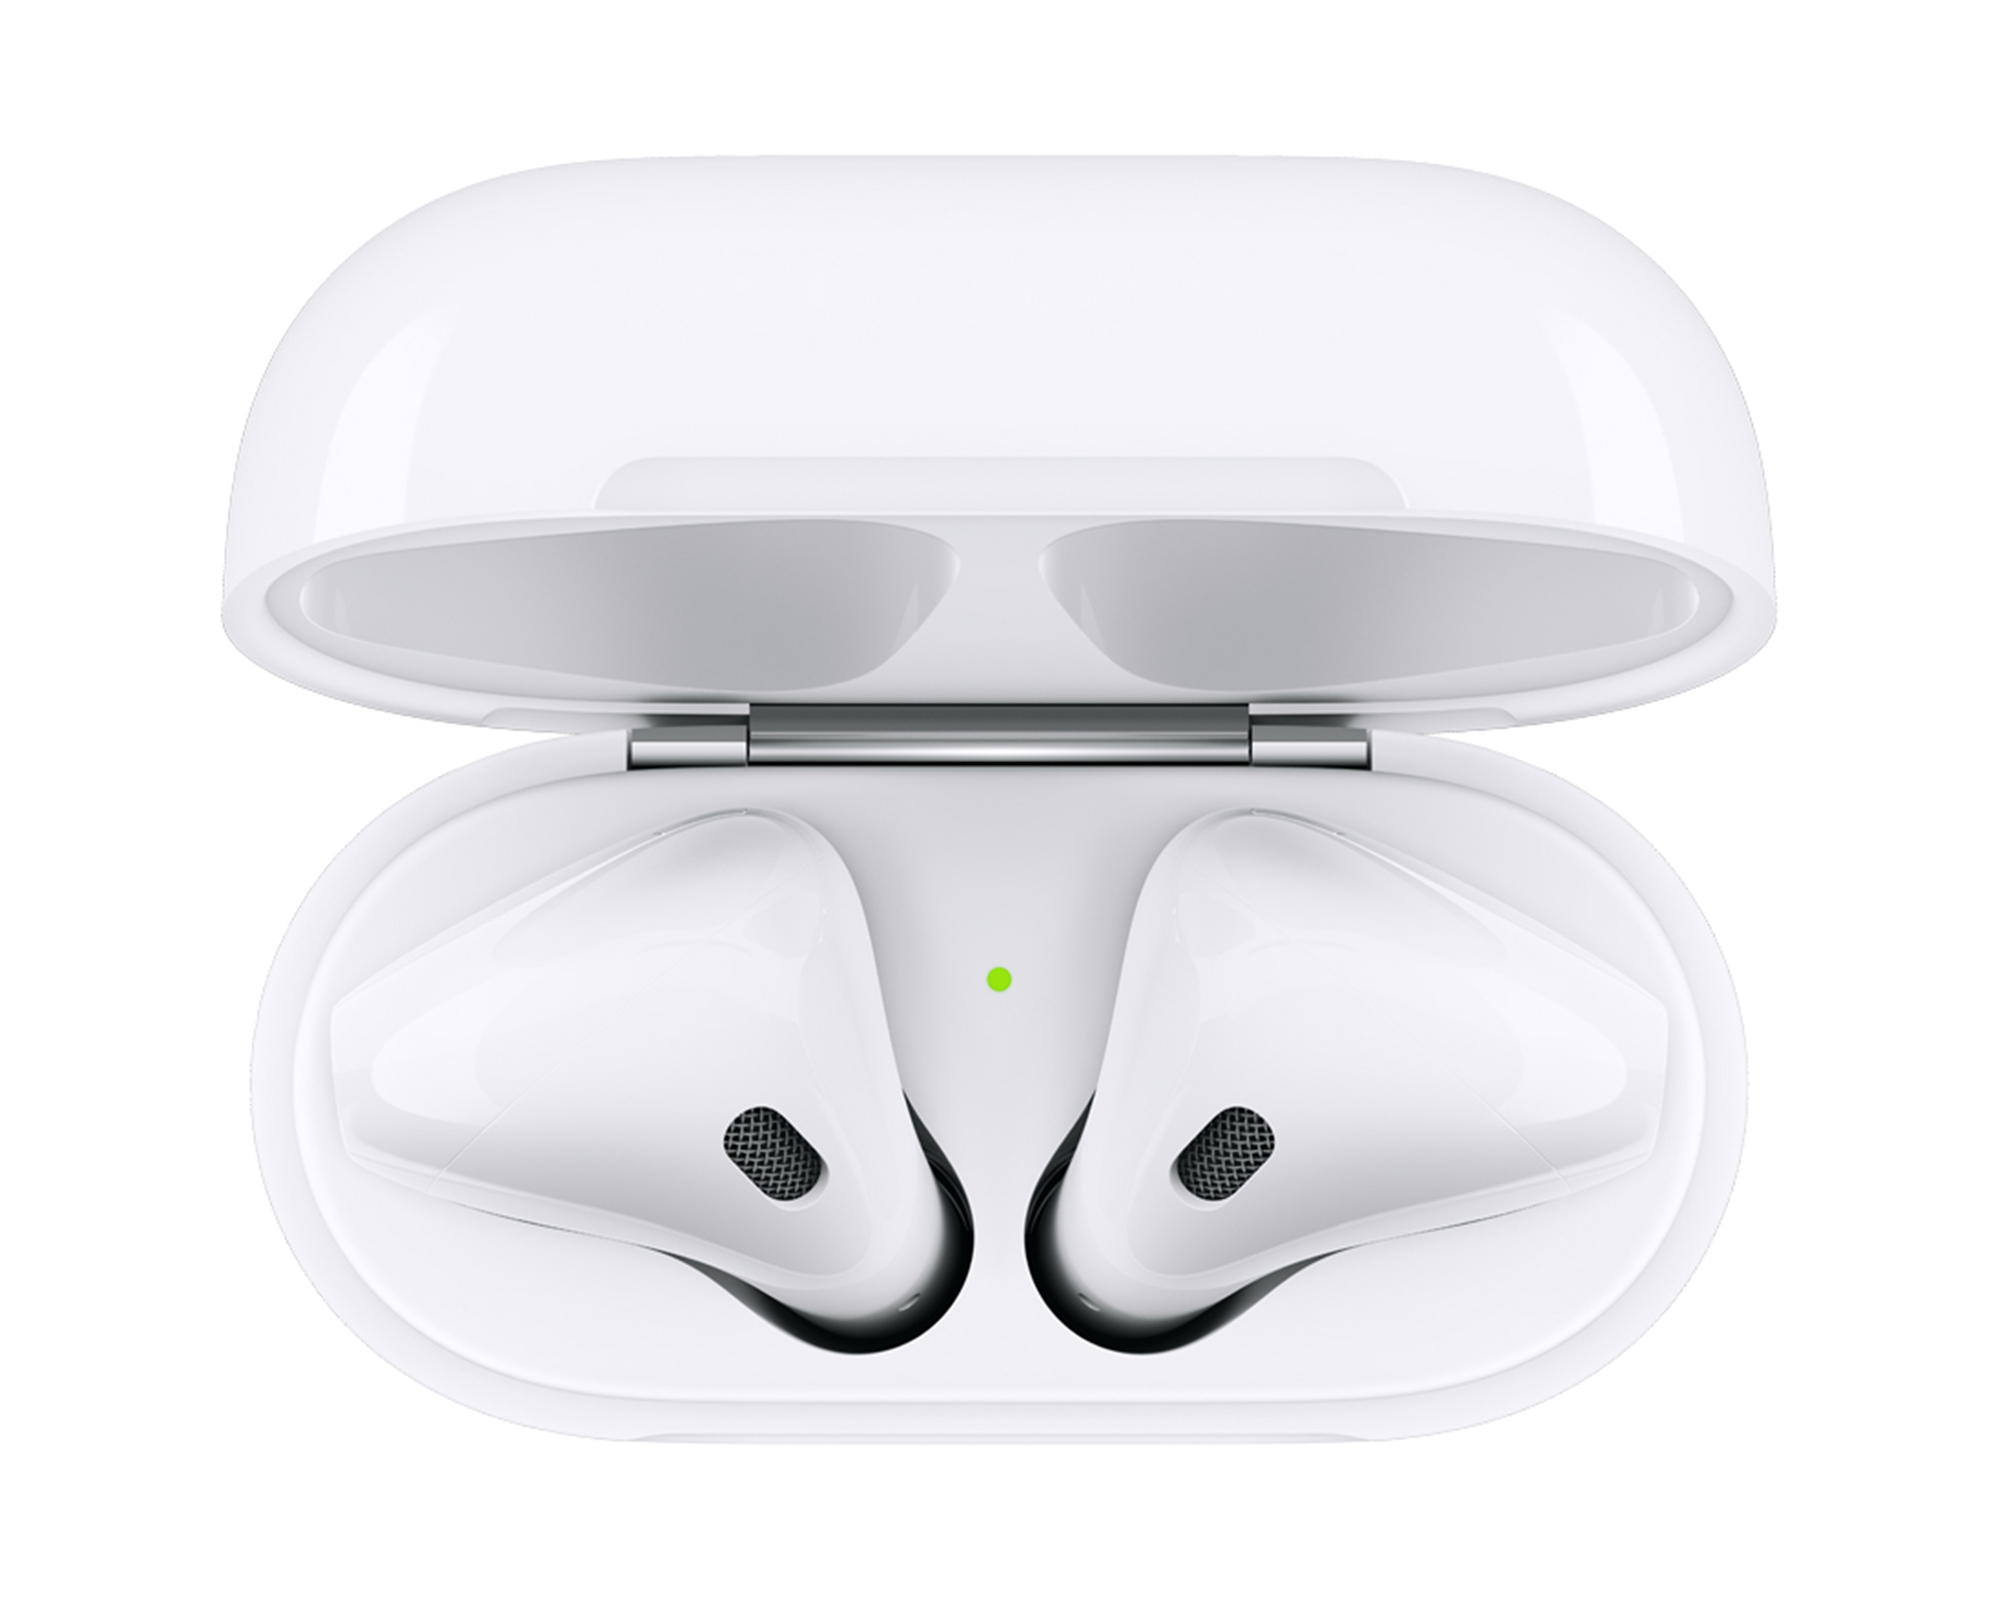 Used Apple AirPods Generation 2 with Wireless Charging Case MRXJ2AM/A (Used ) - image 2 of 8